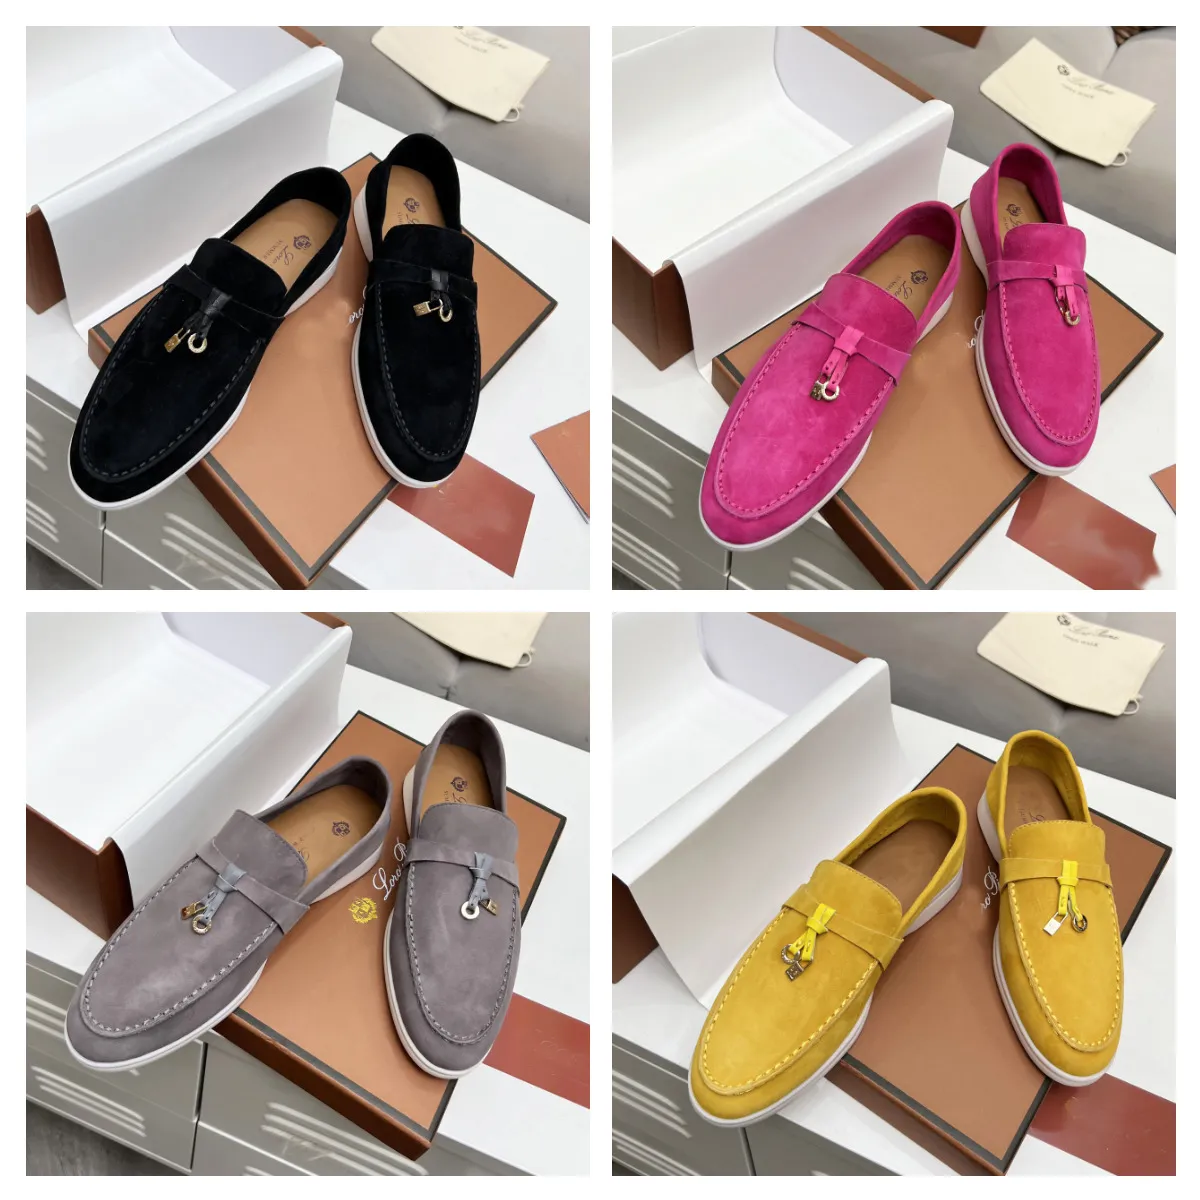 LP Loafers Men Women Designer shoe embellished suede loafers Flat Low Top Suede Cow Leather Oxfords Casual Shoes Metal Buckle Comfortable dress shoe 35-46 with box